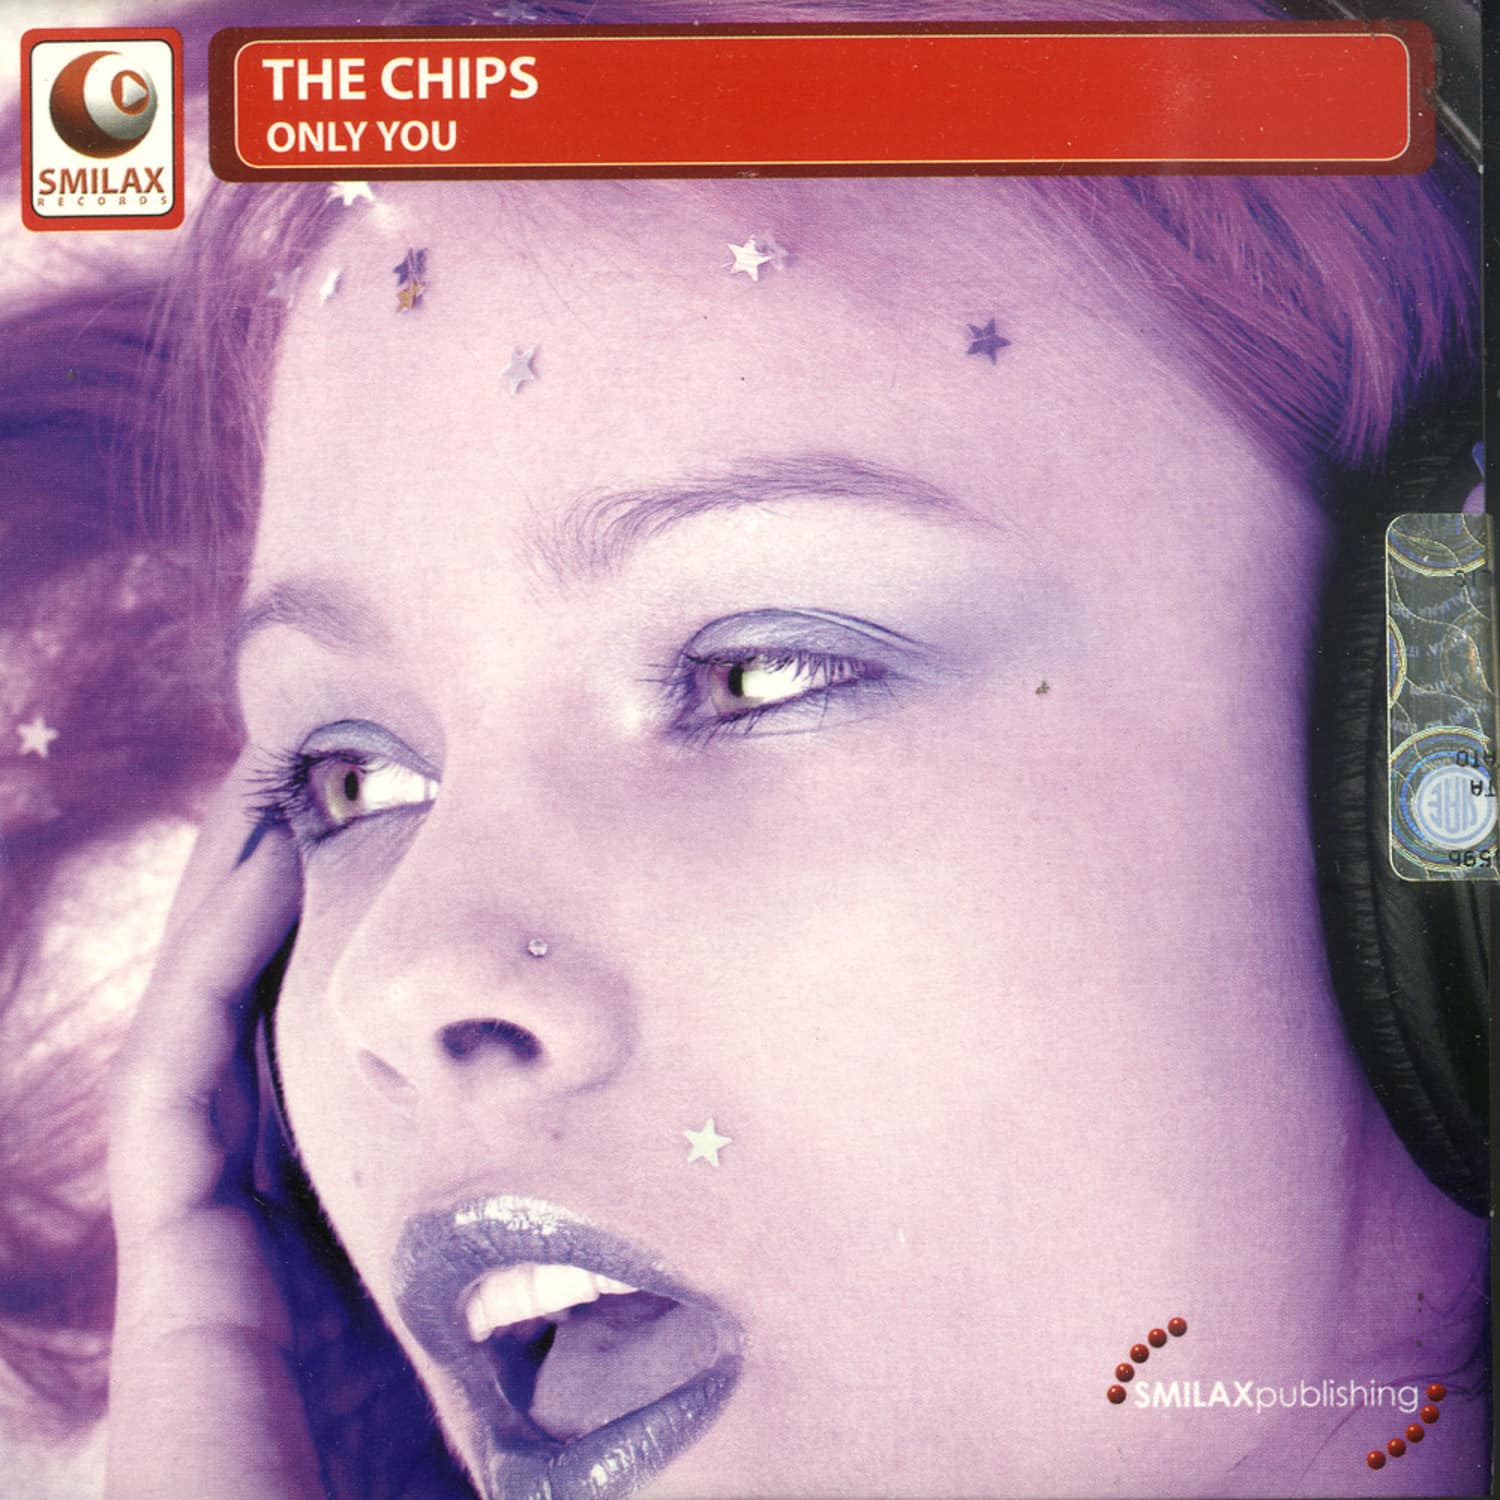 The Chips - ONLY YOU 